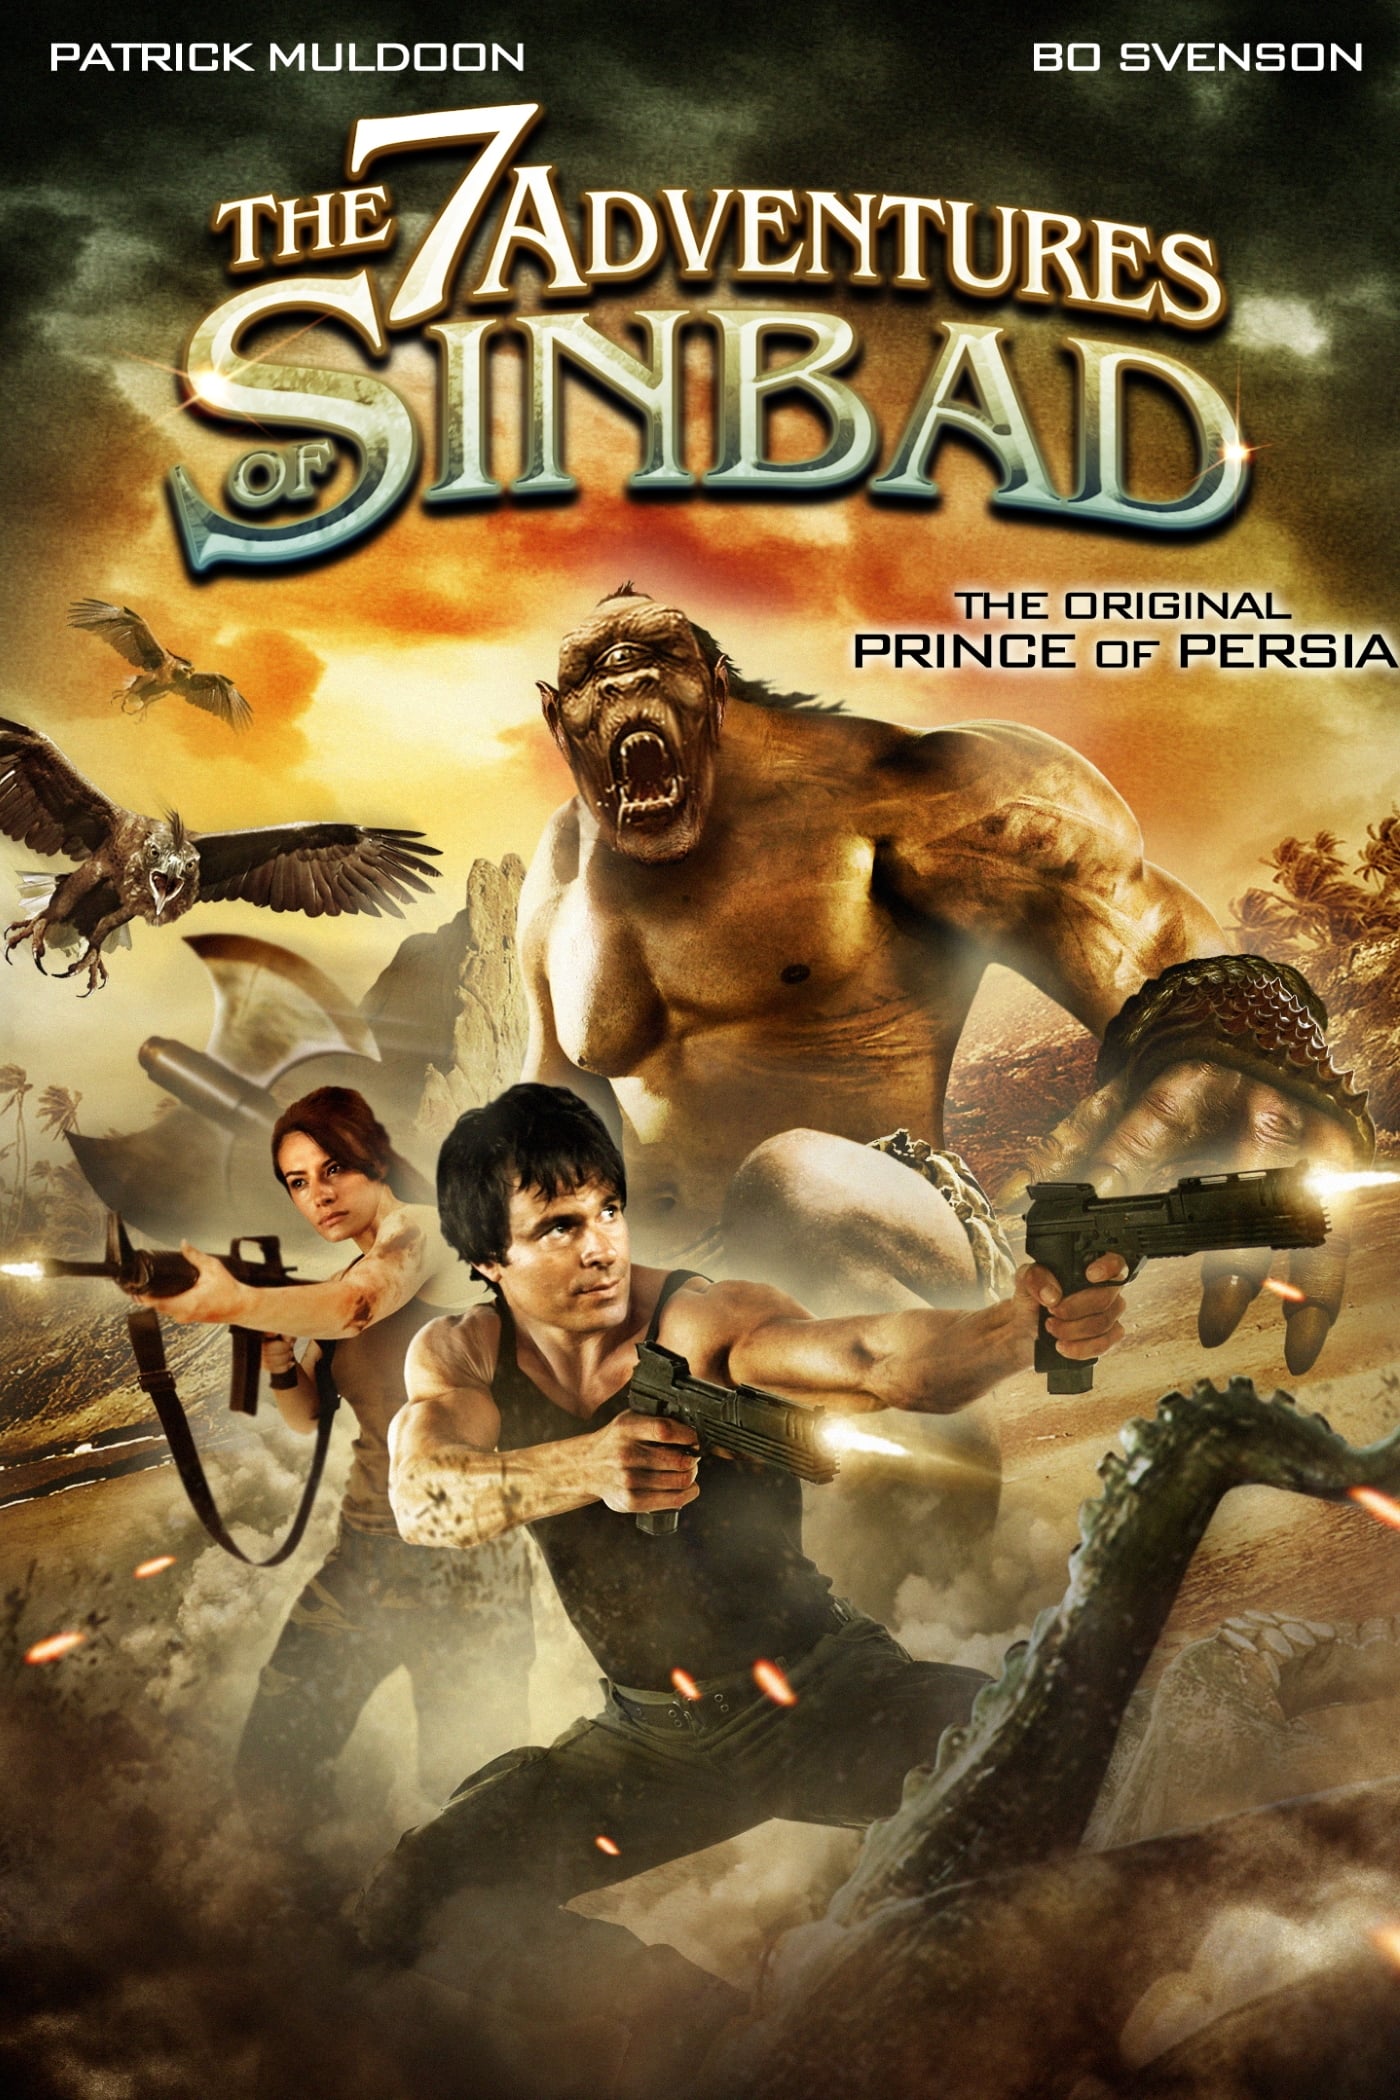 The 7 Adventures of Sinbad on FREECABLE TV